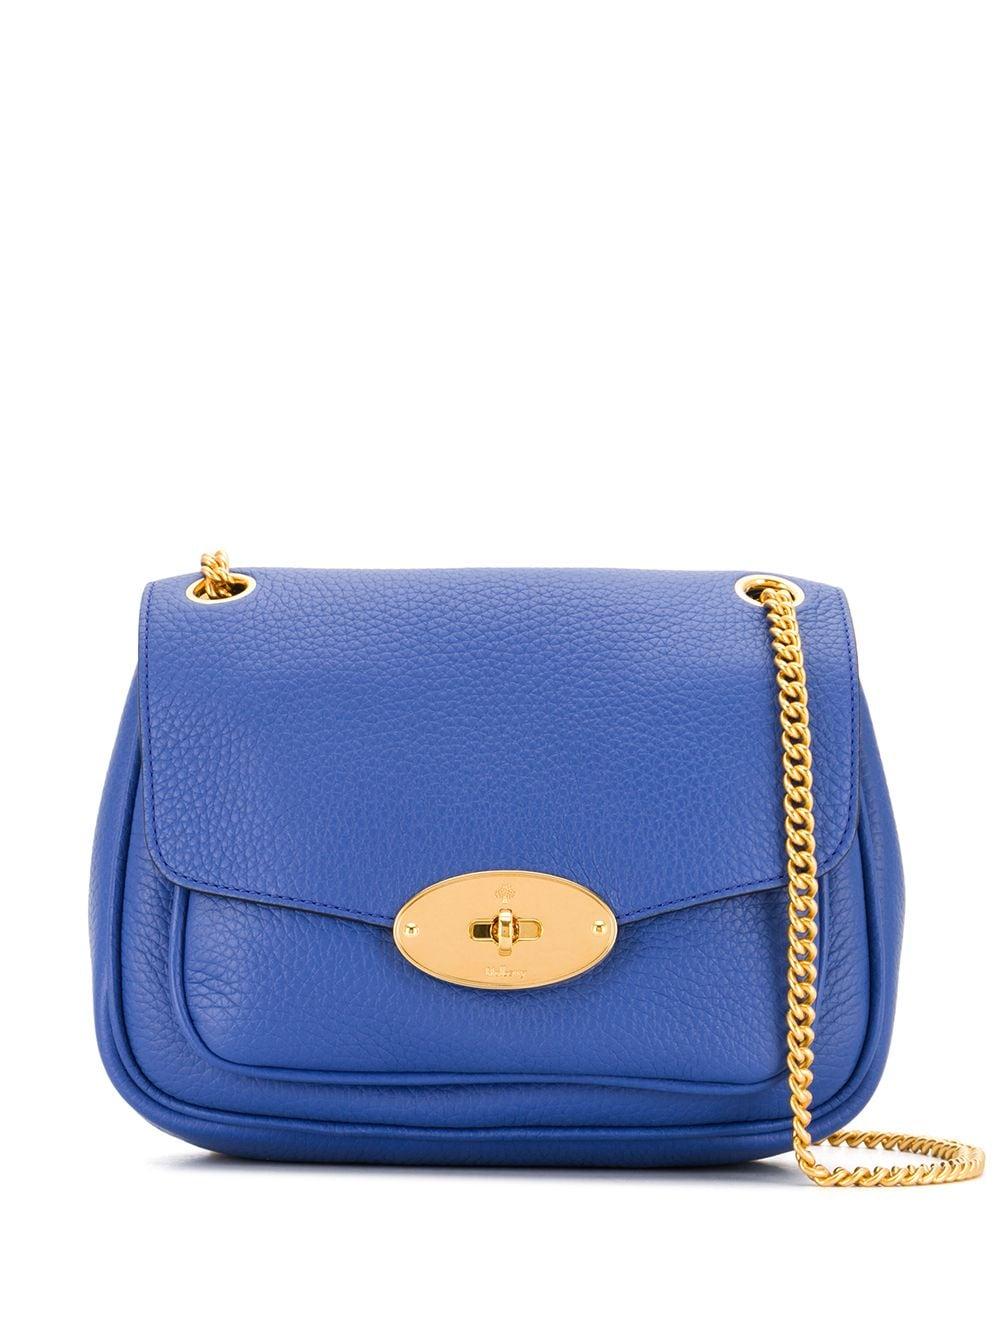 Mulberry Leather Darley Small Shoulder Bag in Blue - Lyst